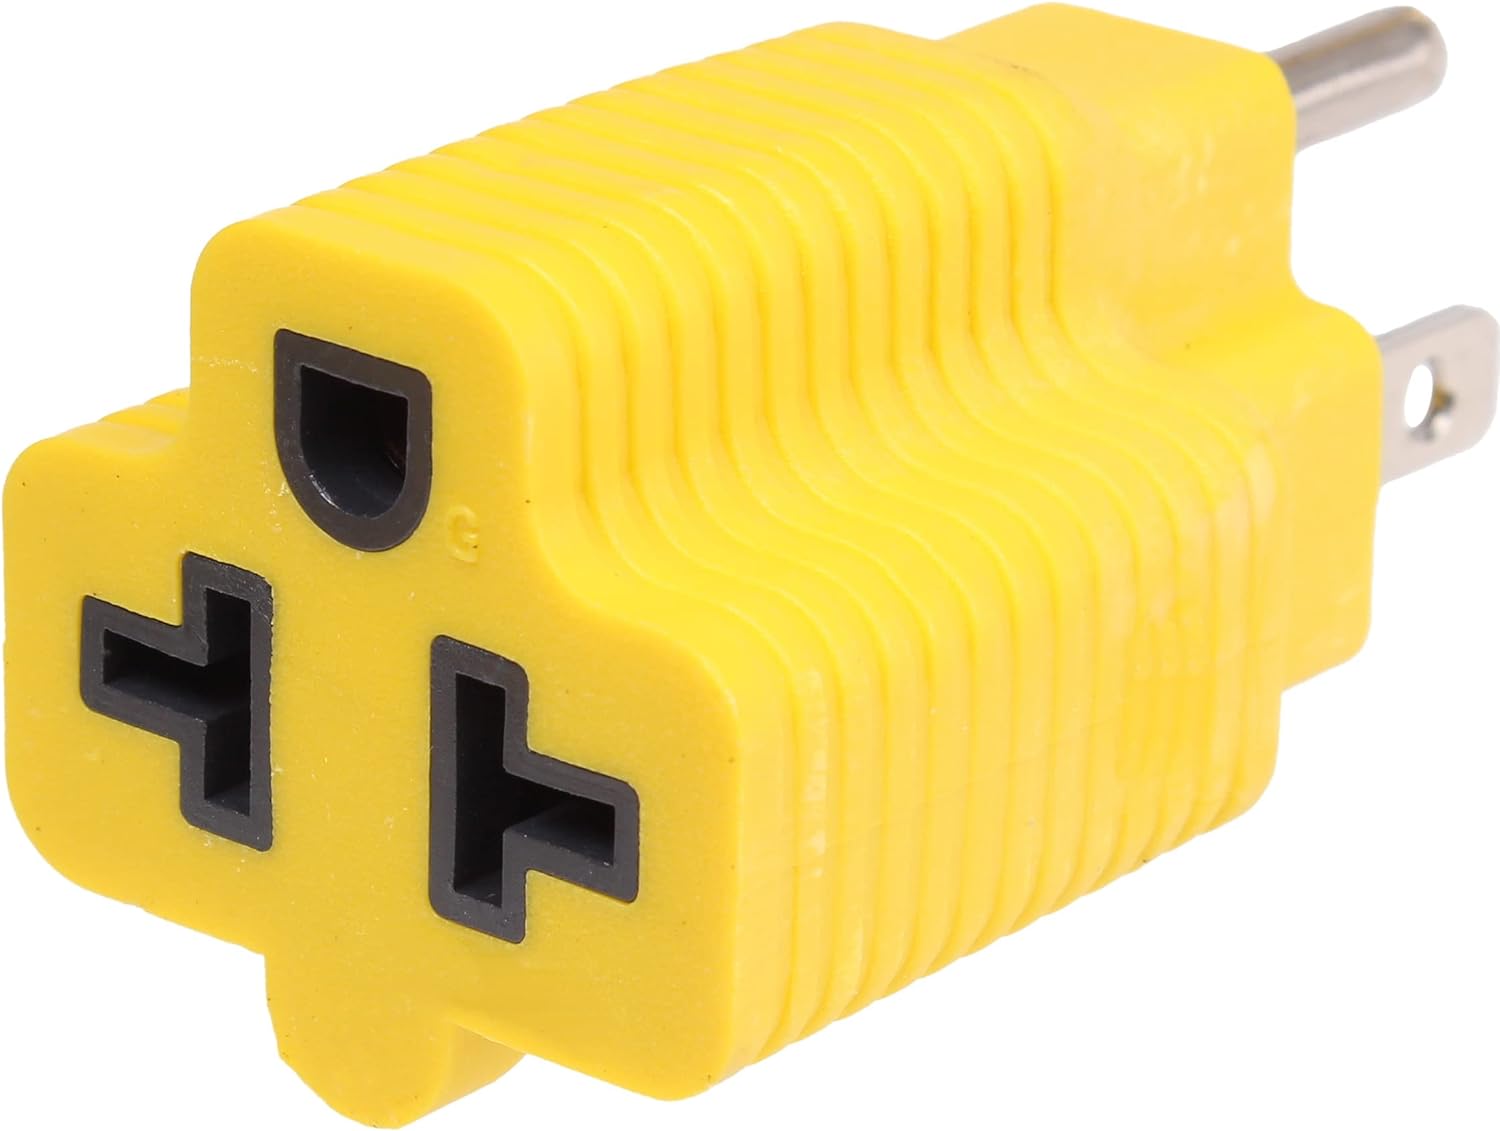 4 In 1 Female T-Blade Adapter 15 Amp Household Plug To 20 Amp, 5-15P To 5-20R,6-15R,6-20R - 15A To 20A 125V, Window Wall Outlet Adaptor. Easy To See Yellow. (3-PK, Yellow) - image 5 of 6